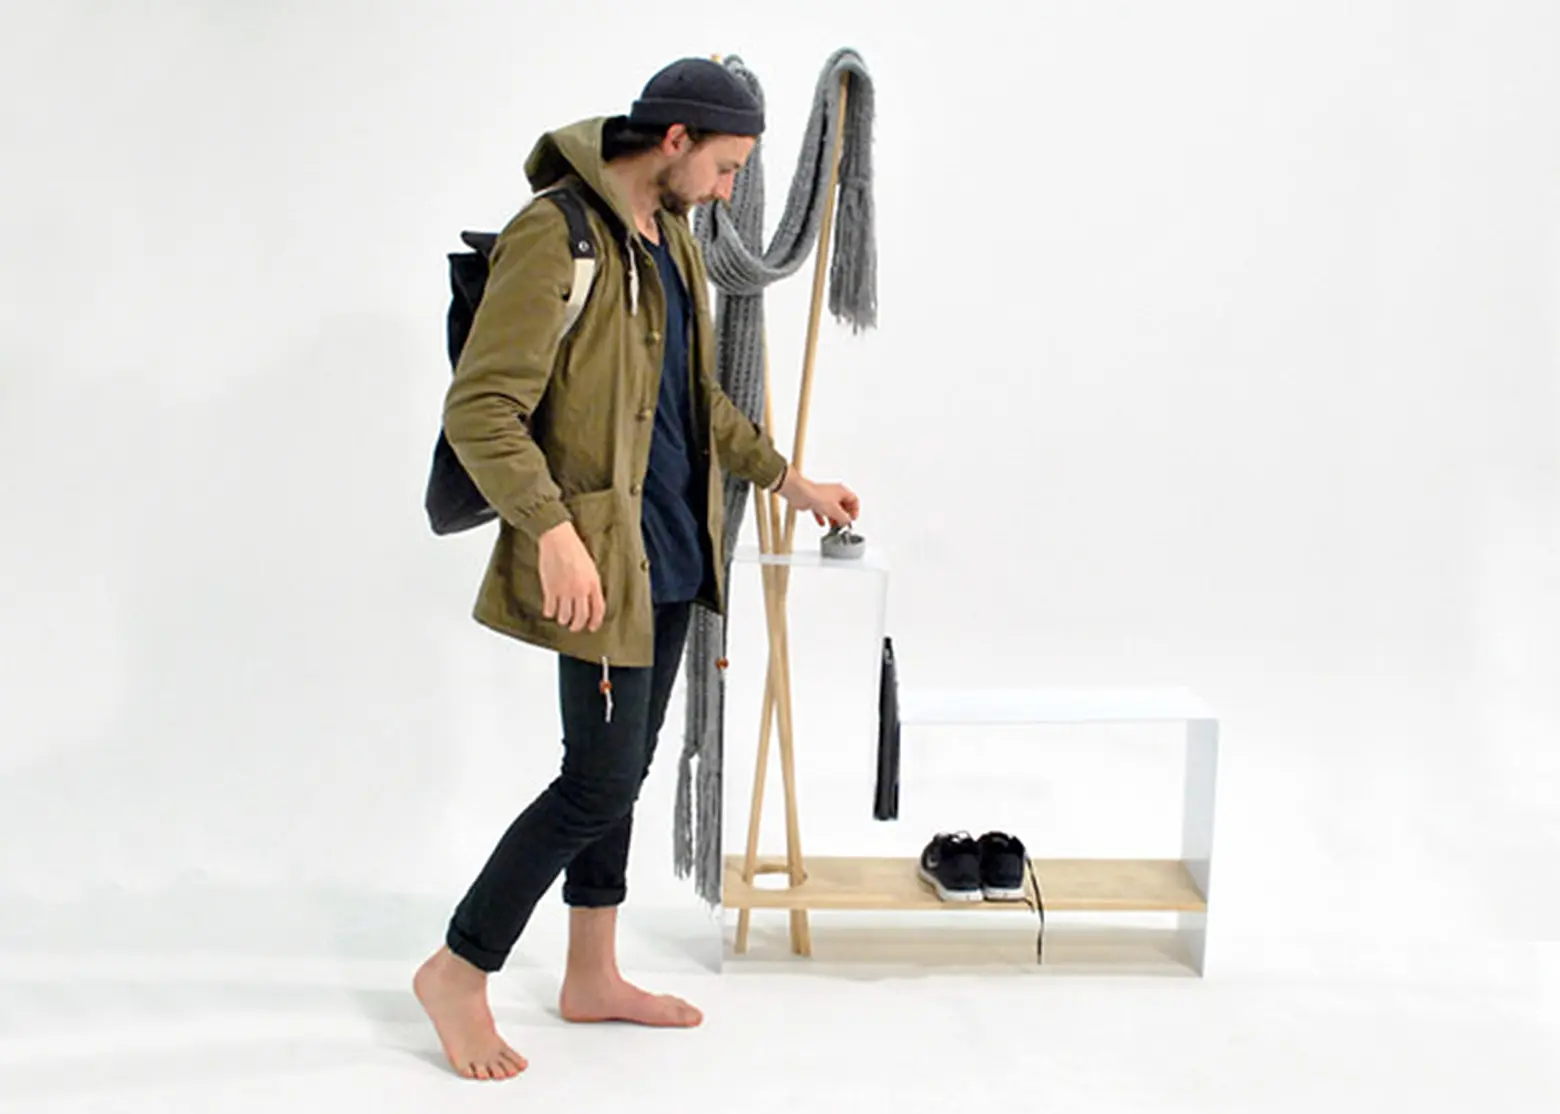 Coat Rack for Bonnie Effortlessly Holds the Items You Shouldn’t Forget When Going Out